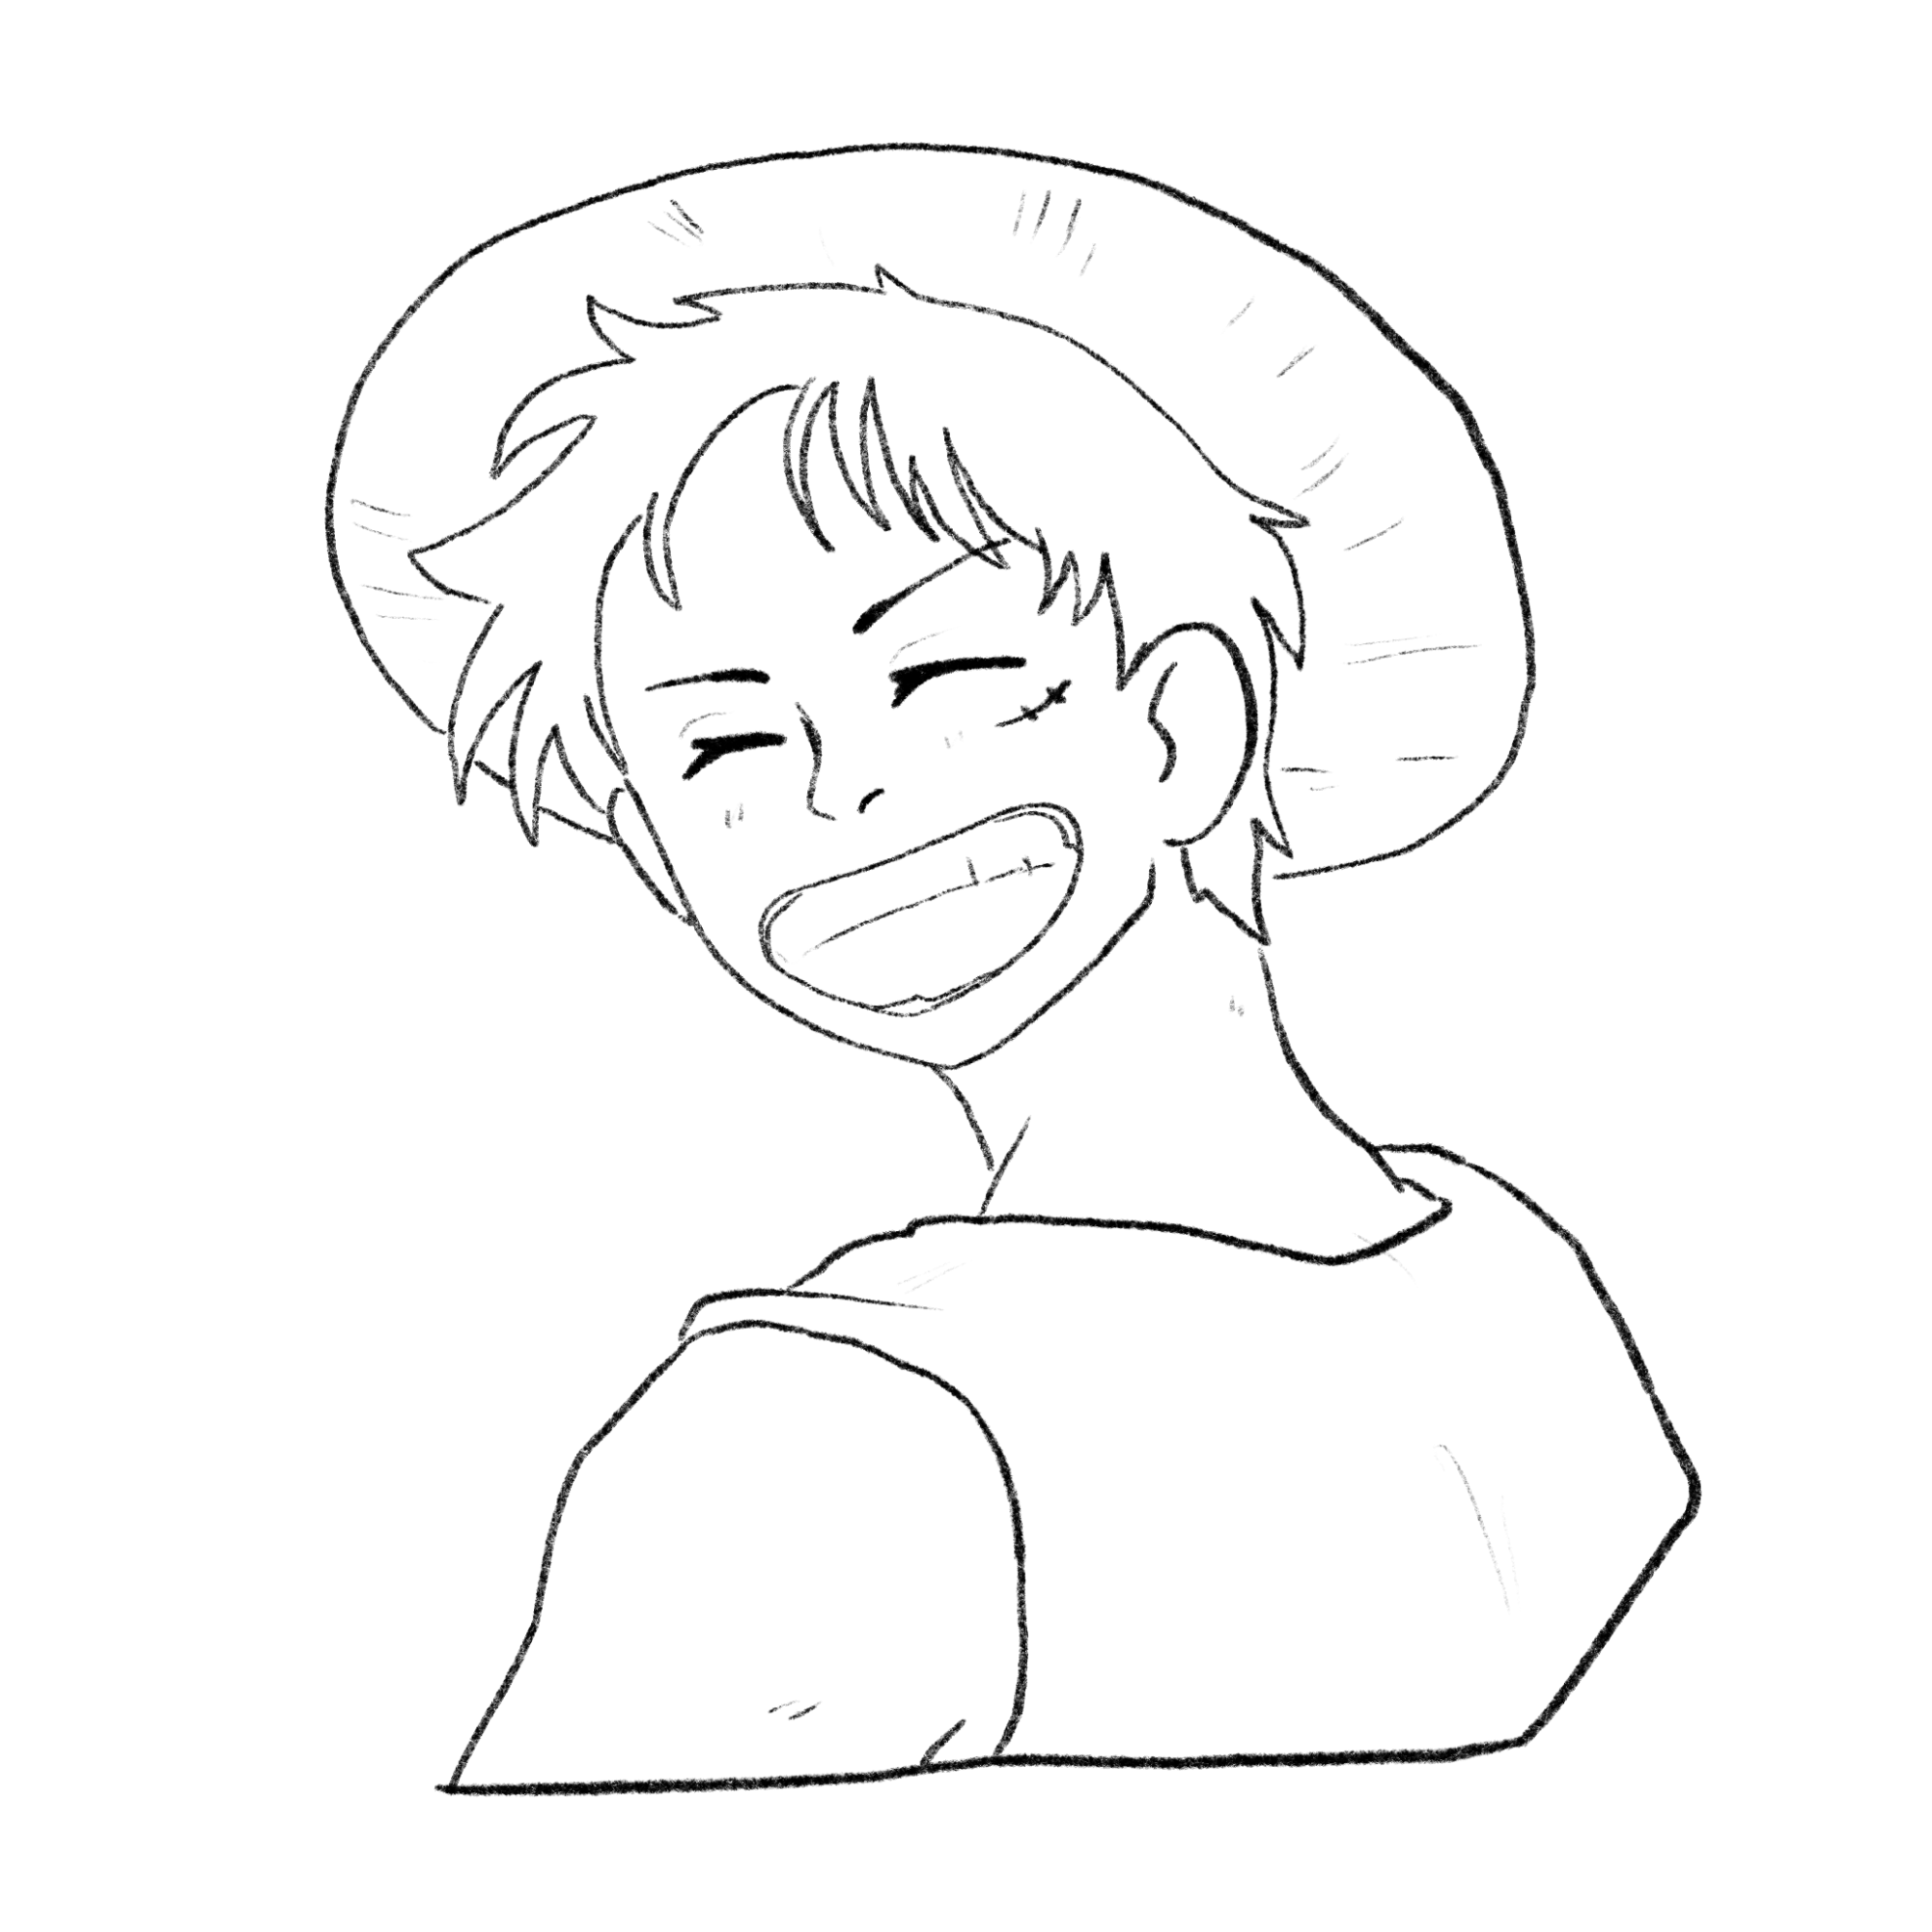 Luffy wears his iconic straw hat. It was a gift from his idol, Red-Haired Shanks.